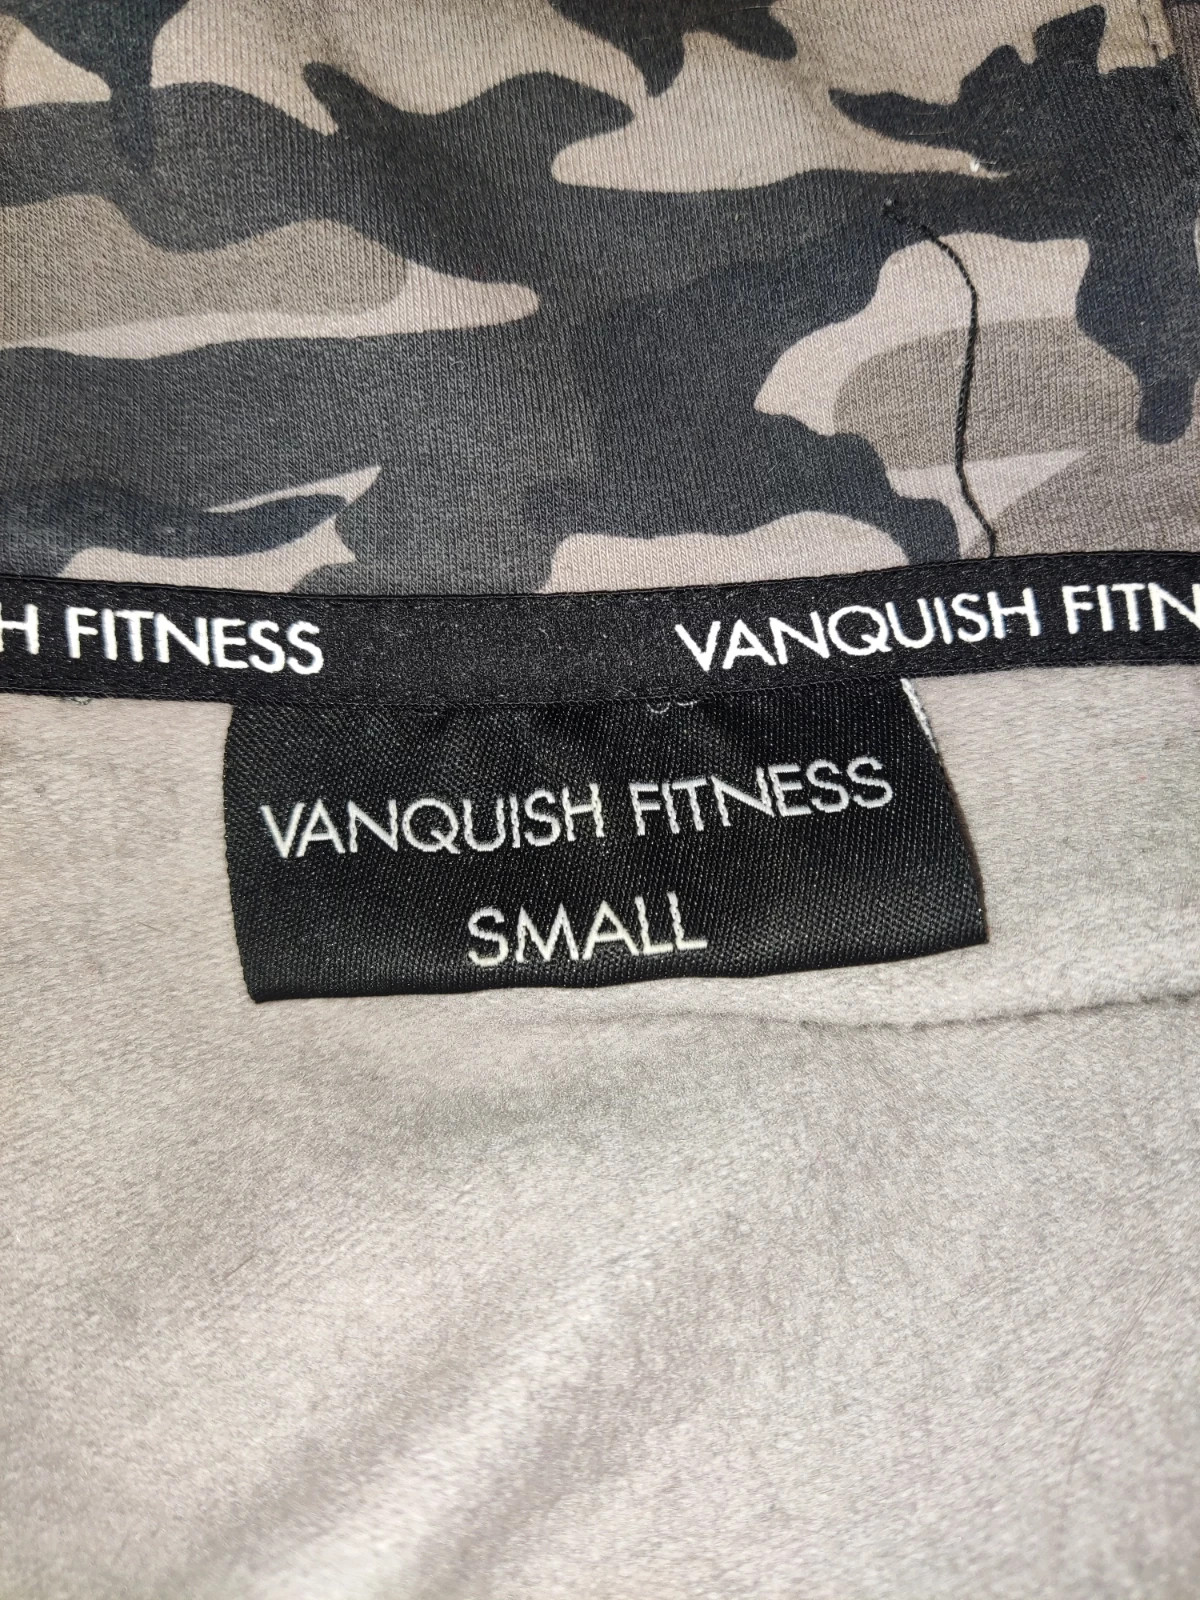 Vanquish Fitness on X: What do you think of this fit? - Vanquish